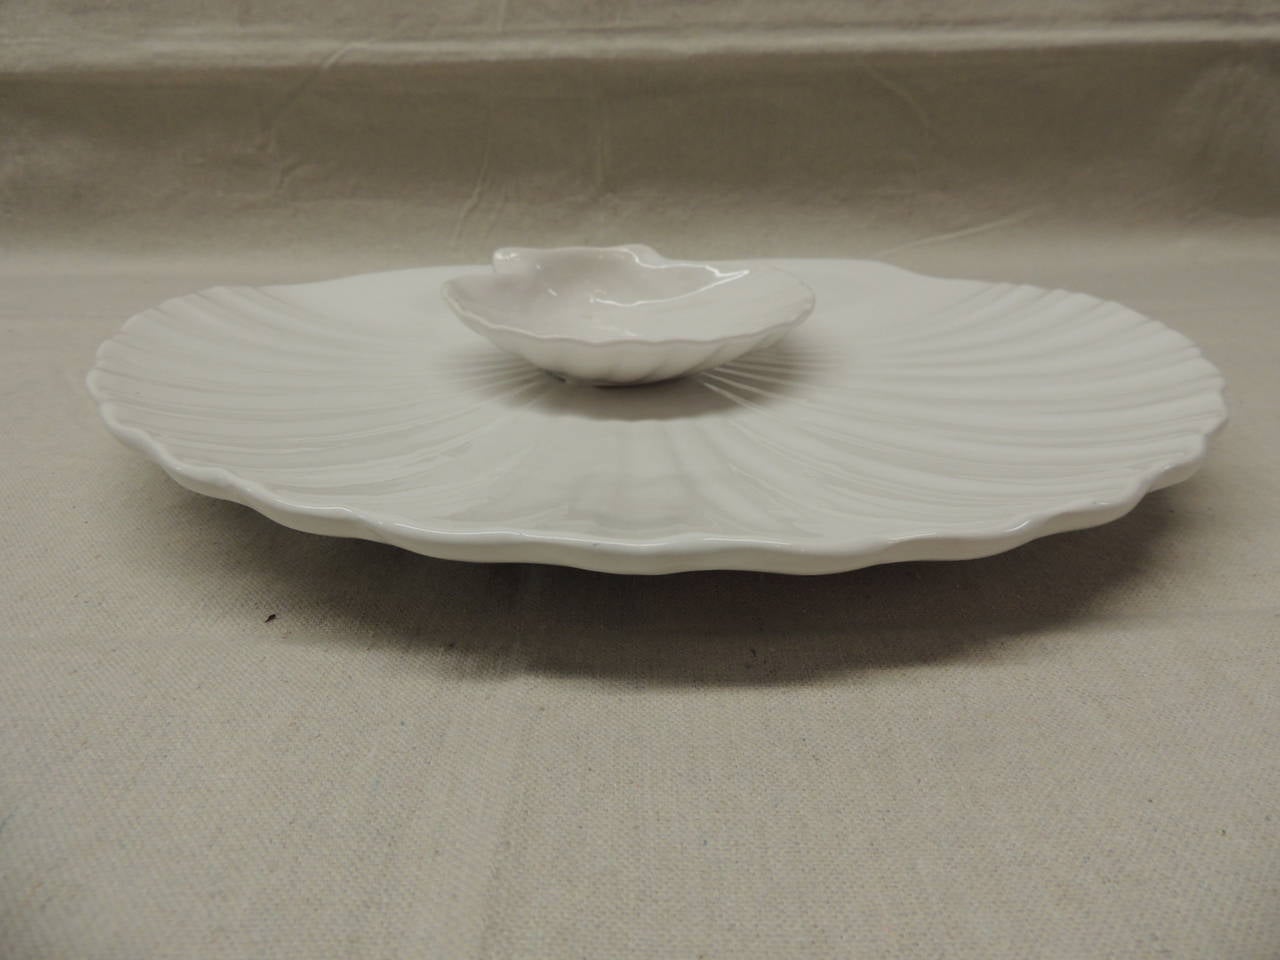 White ceramic sea shell serving dish with small sea shell dish on top.